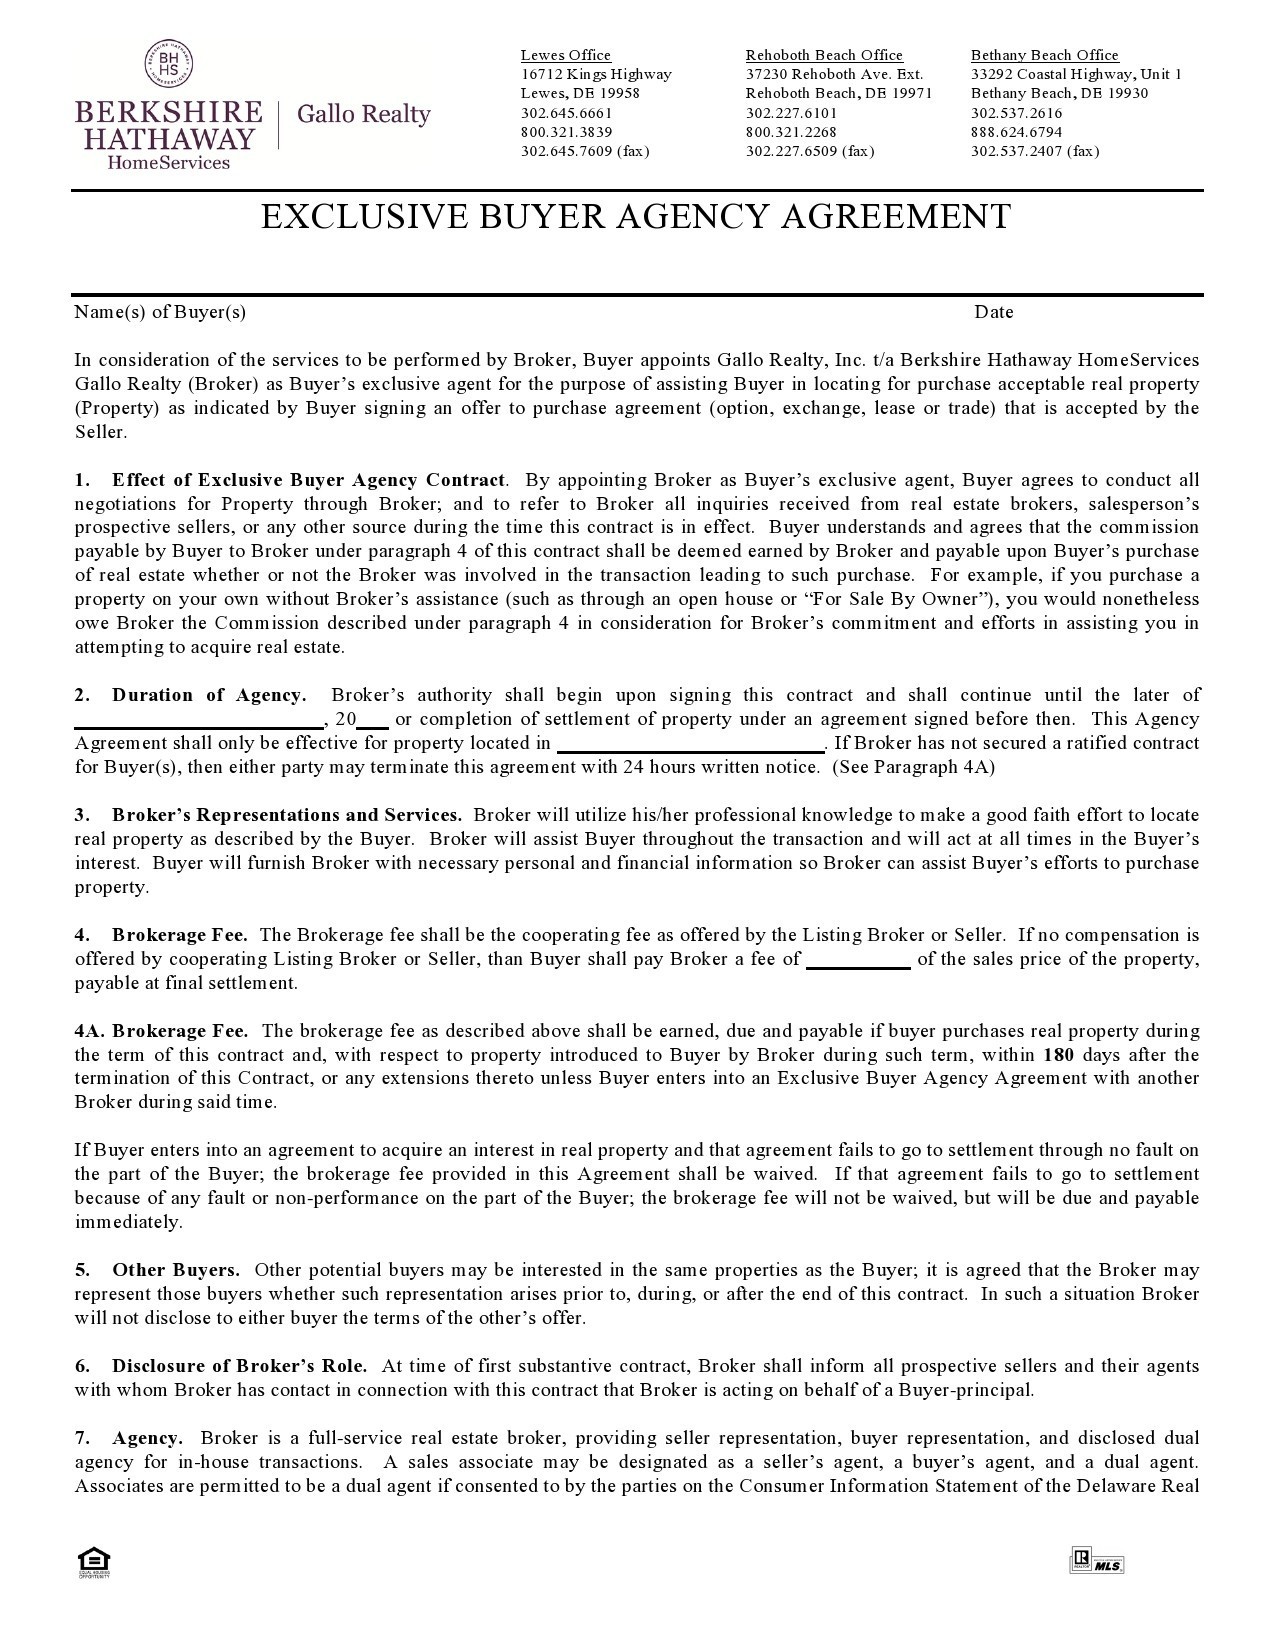 Free buyer agency agreement 25